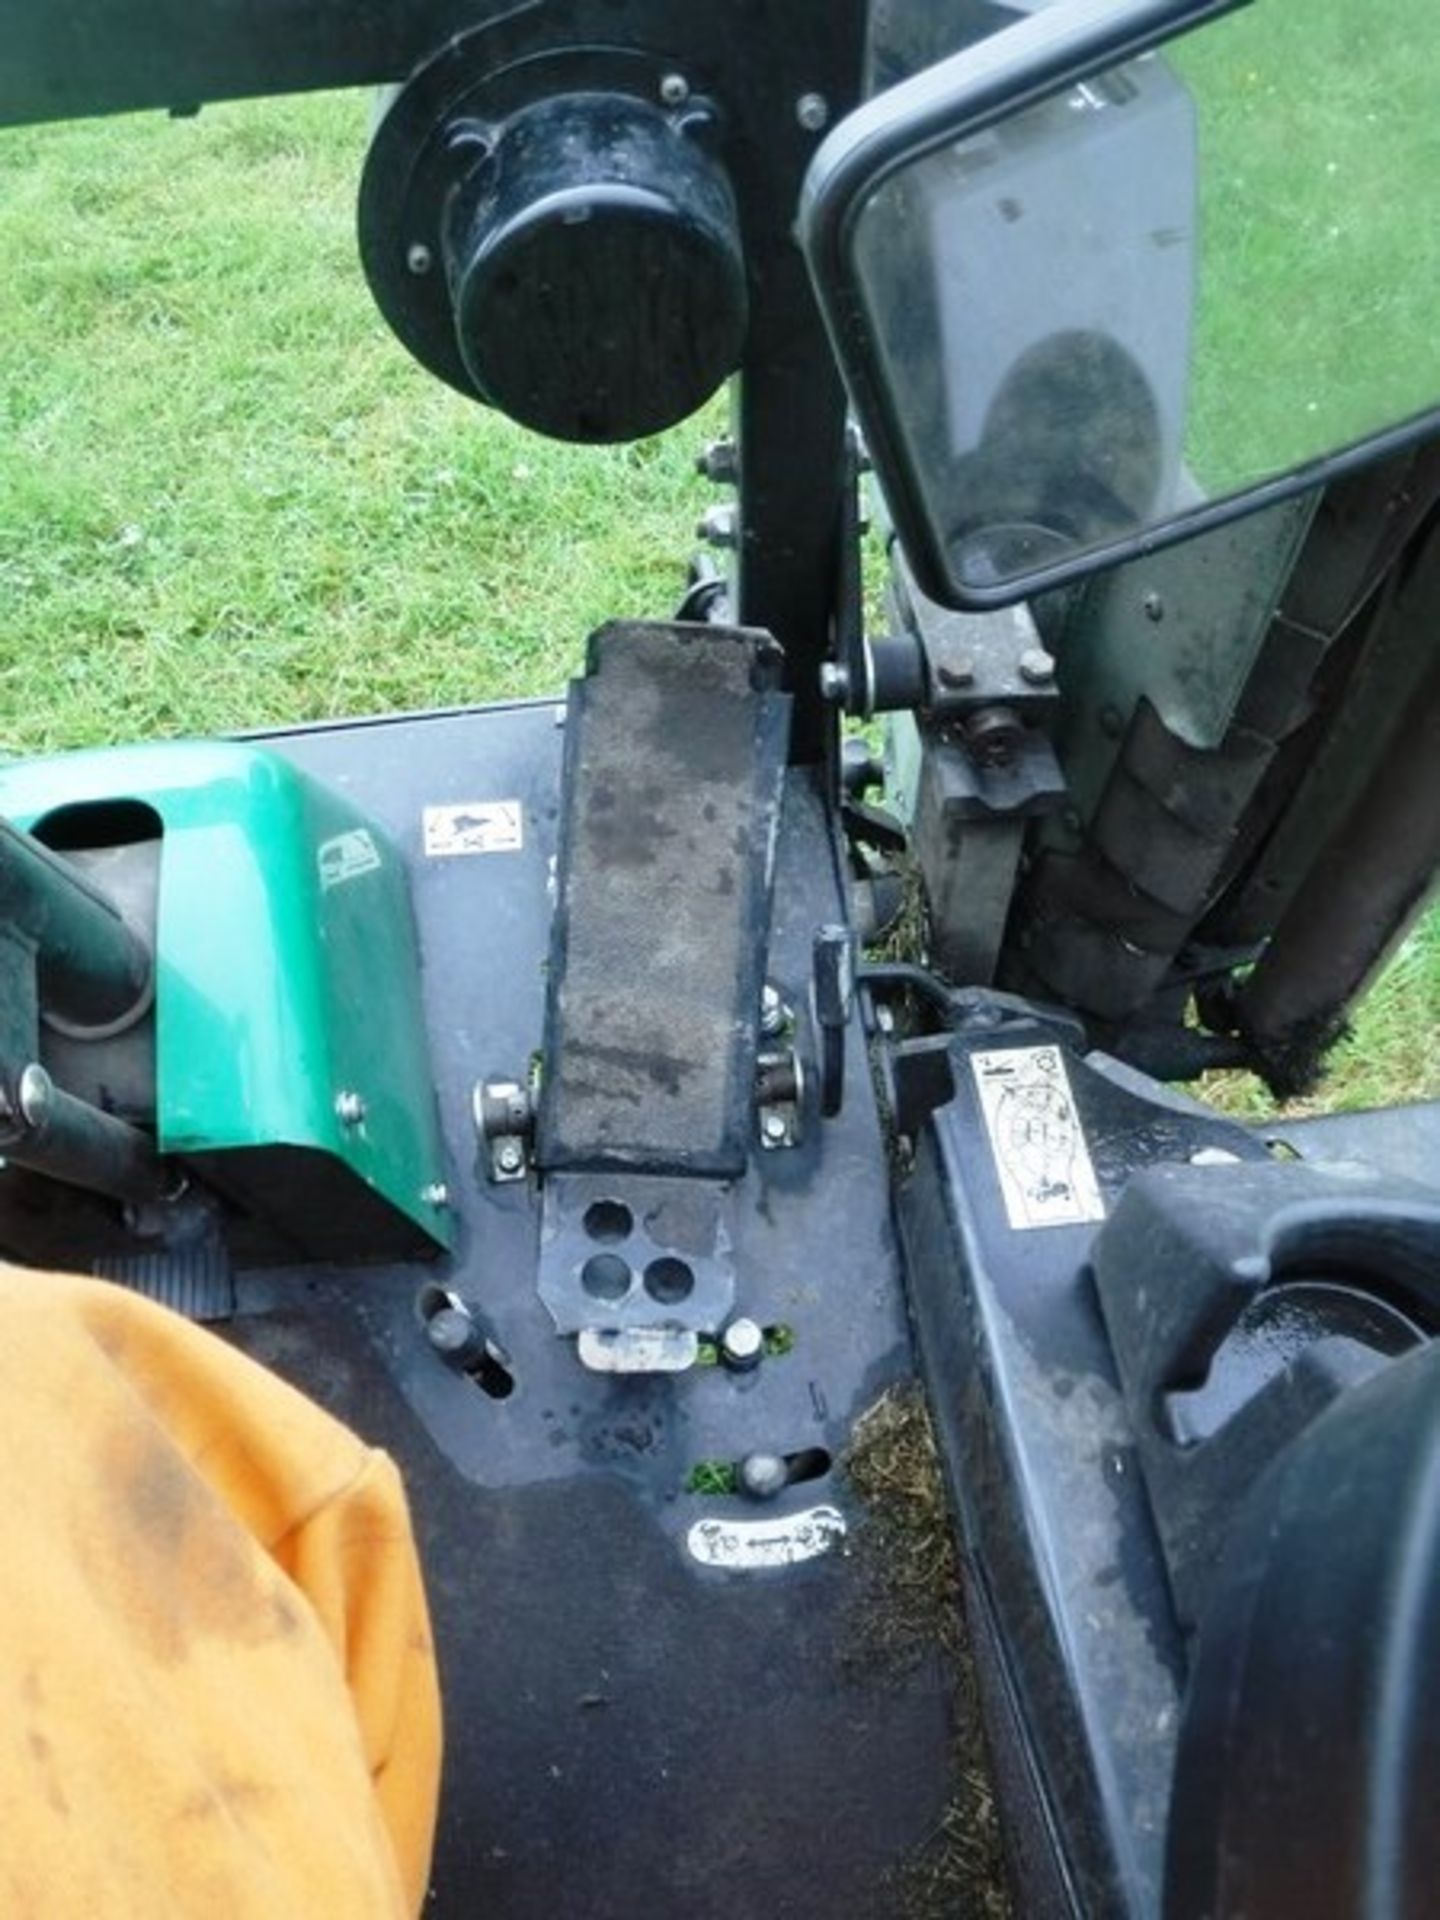 2013 REG RANSOMES PARKWAY 3 RIDE-ON MOWER REG SF13 HKG. S/N H000414. 2039HRS (NOT VERIFIED) - Image 7 of 16